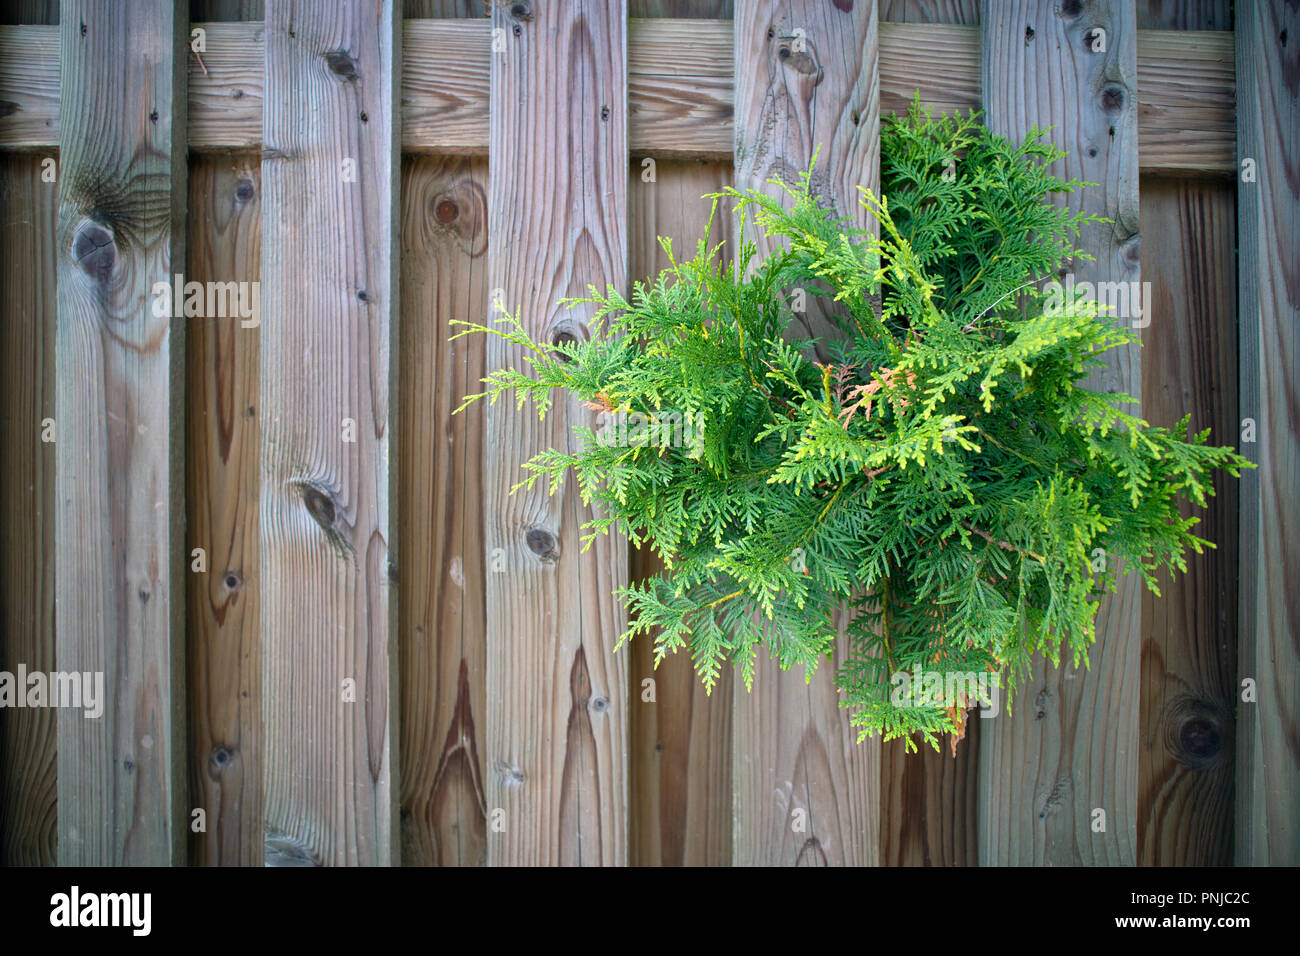 Evergreen branch of thuja making its' way through the planed fence planks Stock Photo